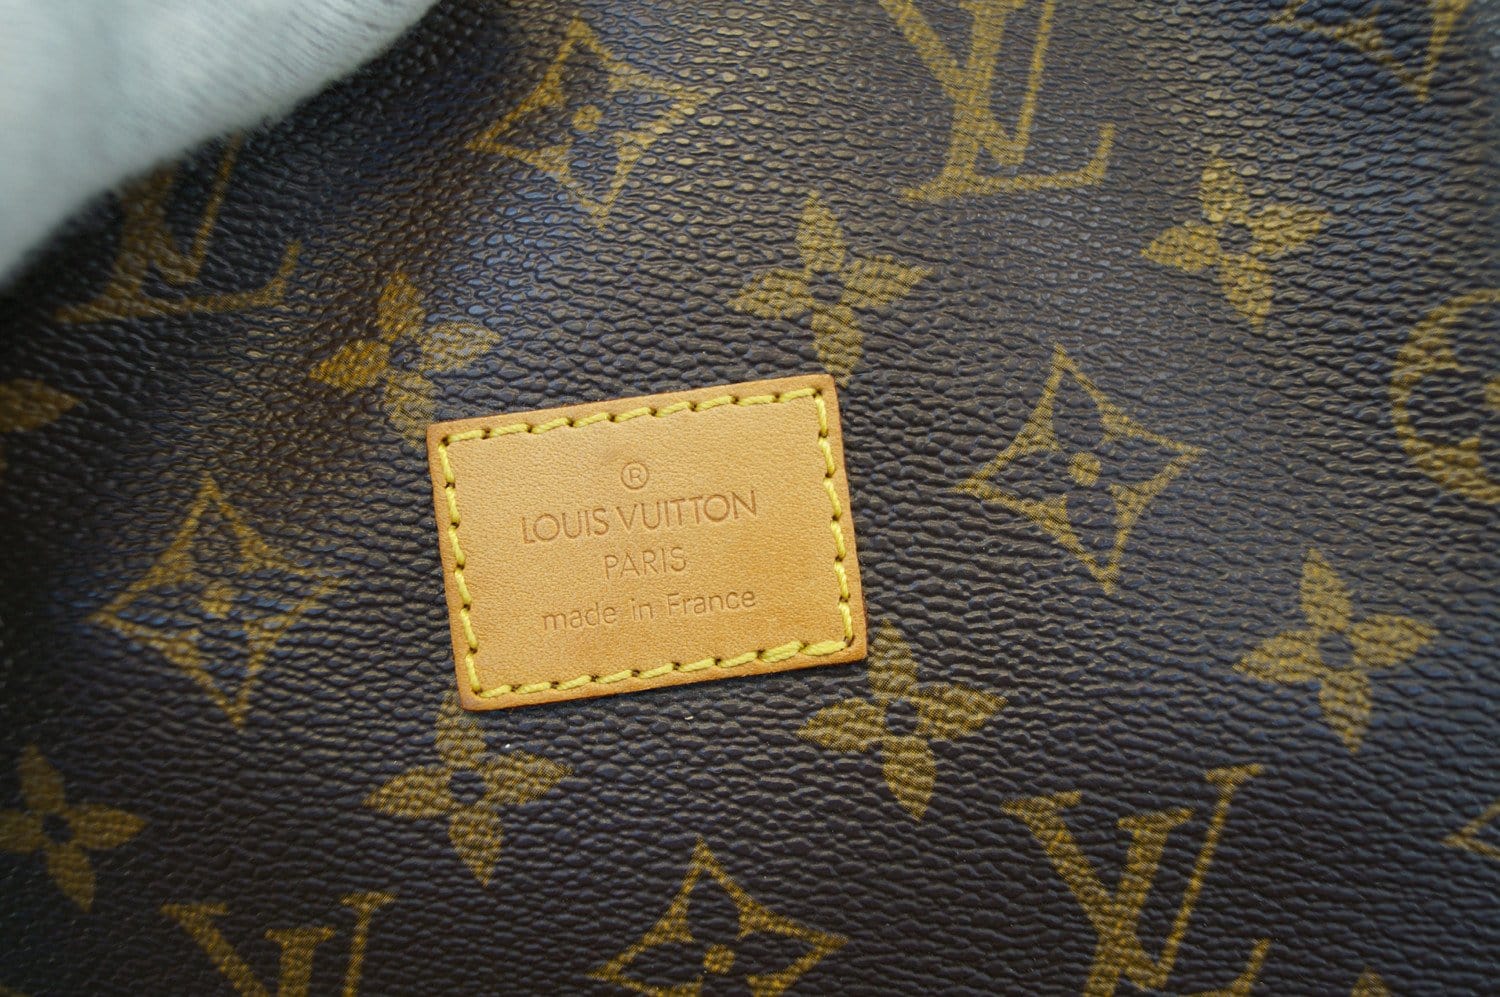 Louis Vuitton Saumur 30 Bag - Prestige Online Store - Luxury Items with  Exceptional Savings from the eShop